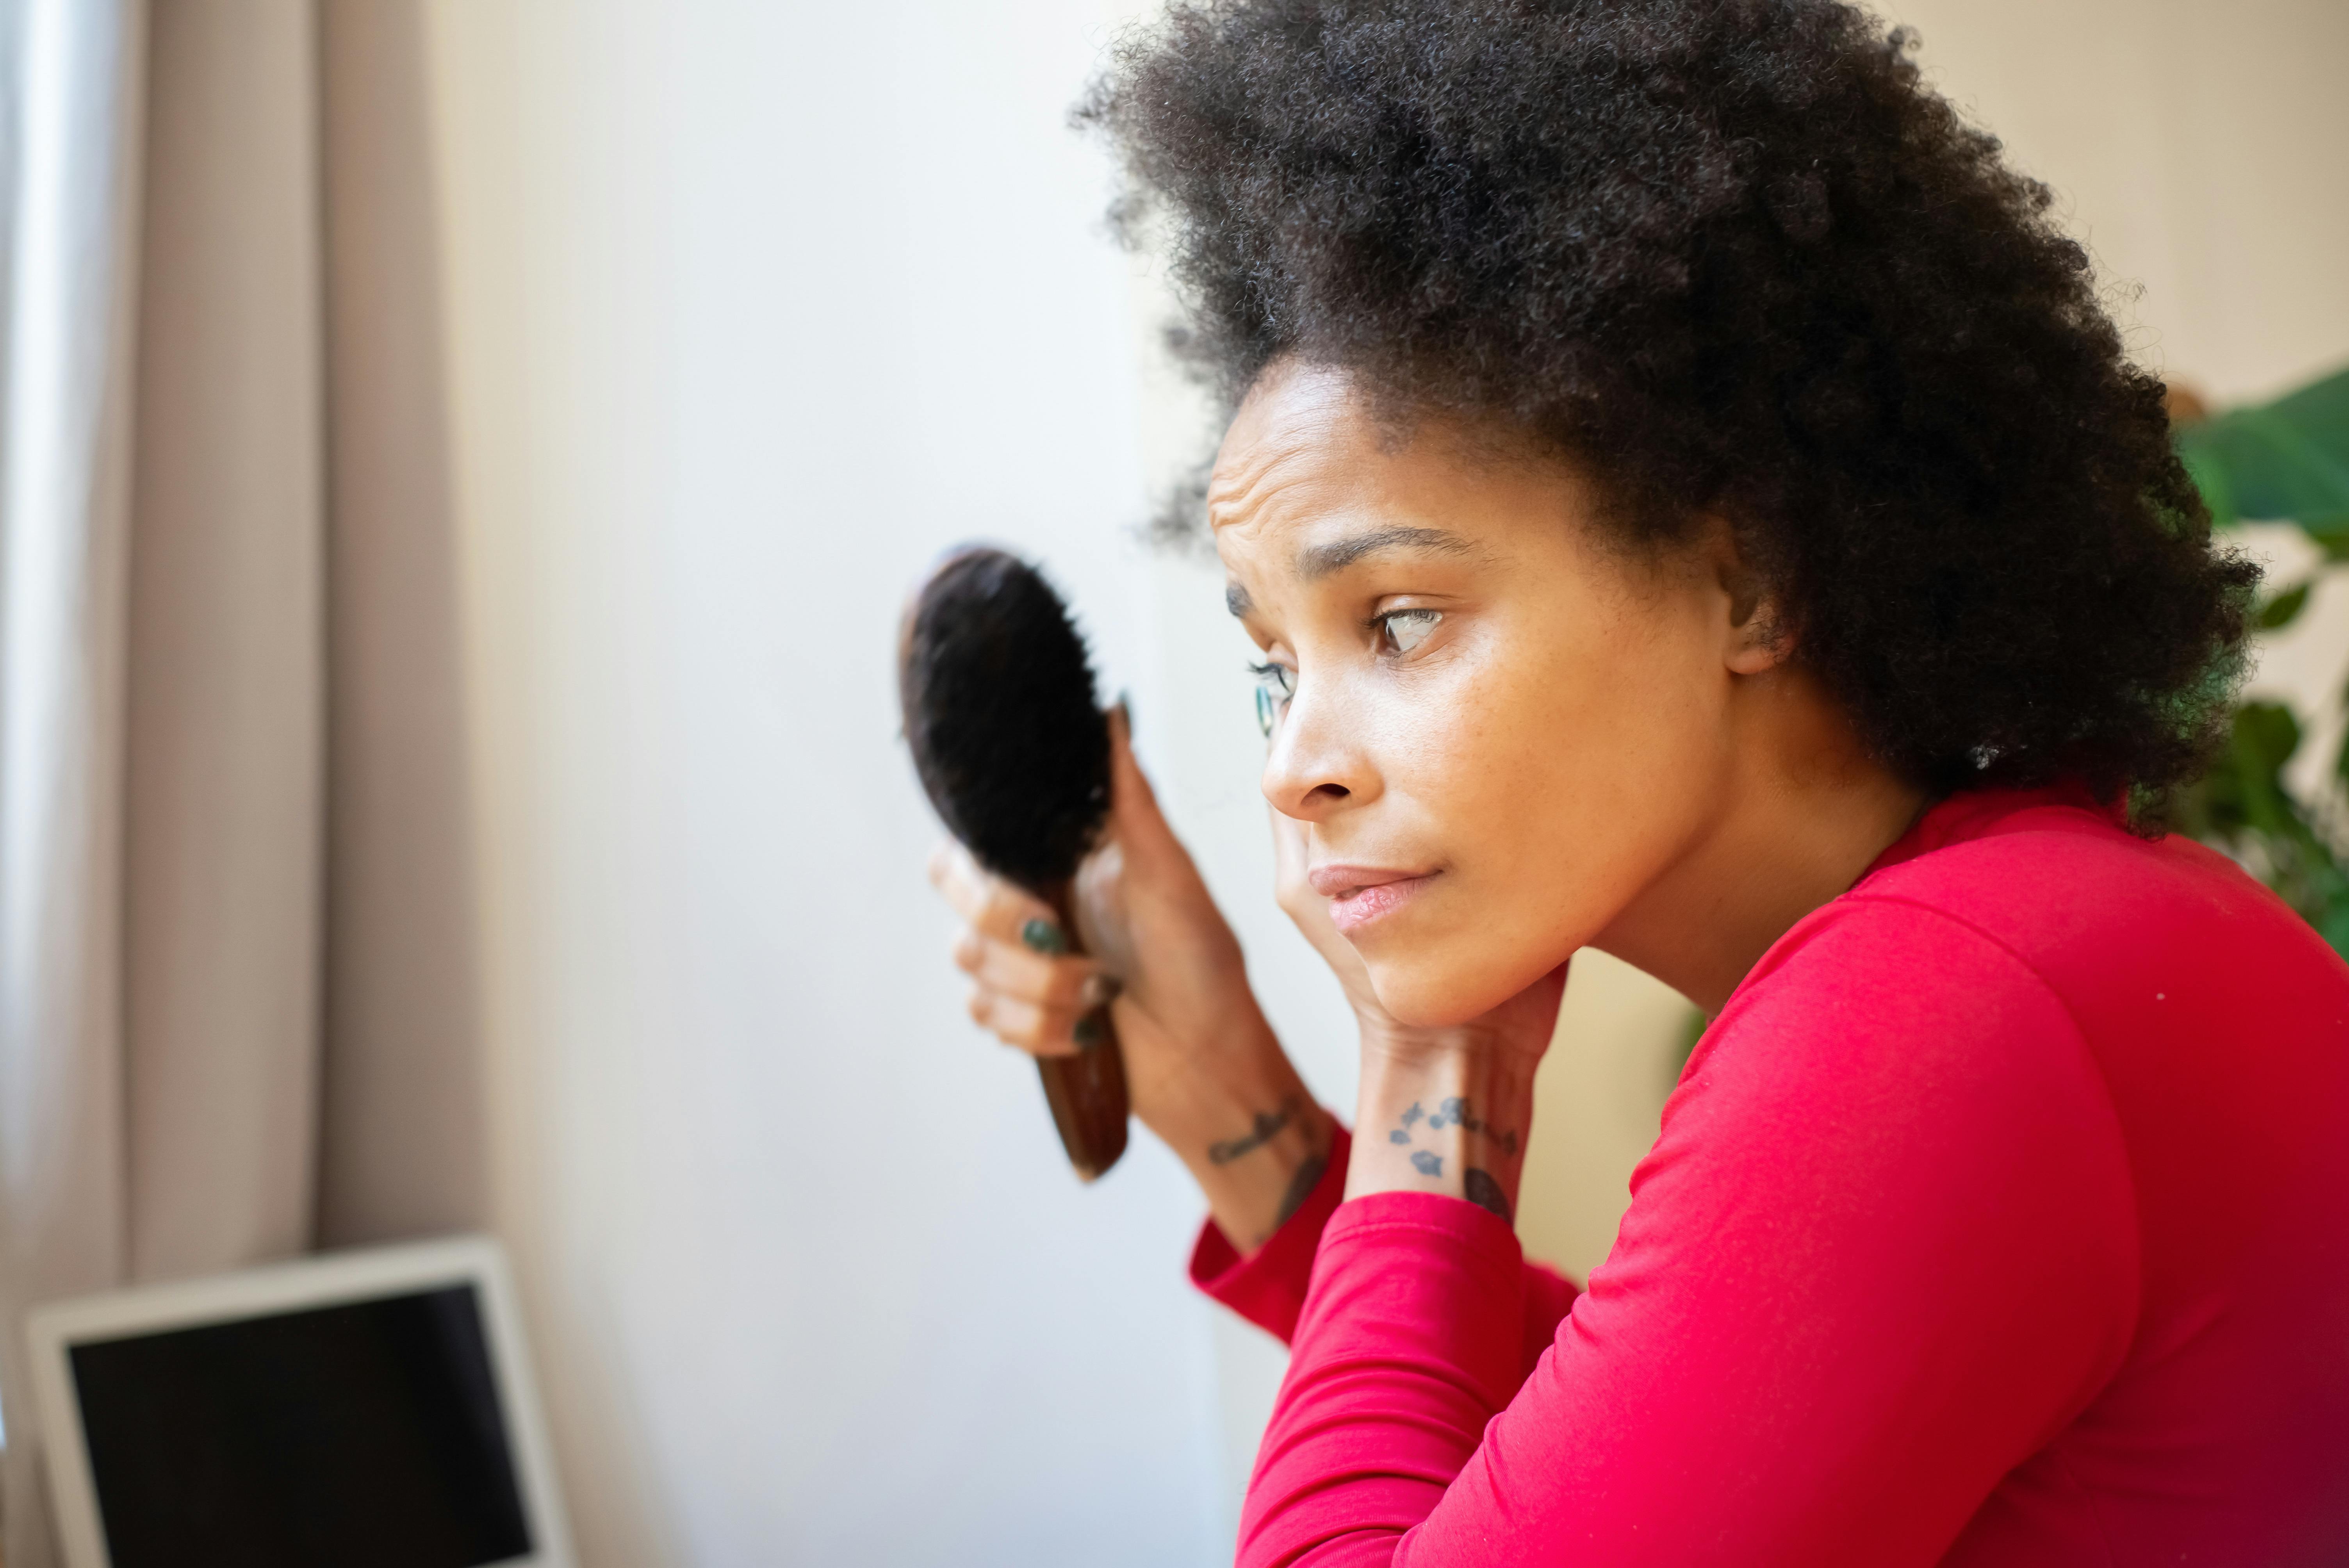 Woman with Afro Hairstyle Applying Makeup with a Brush · Free Stock Photo